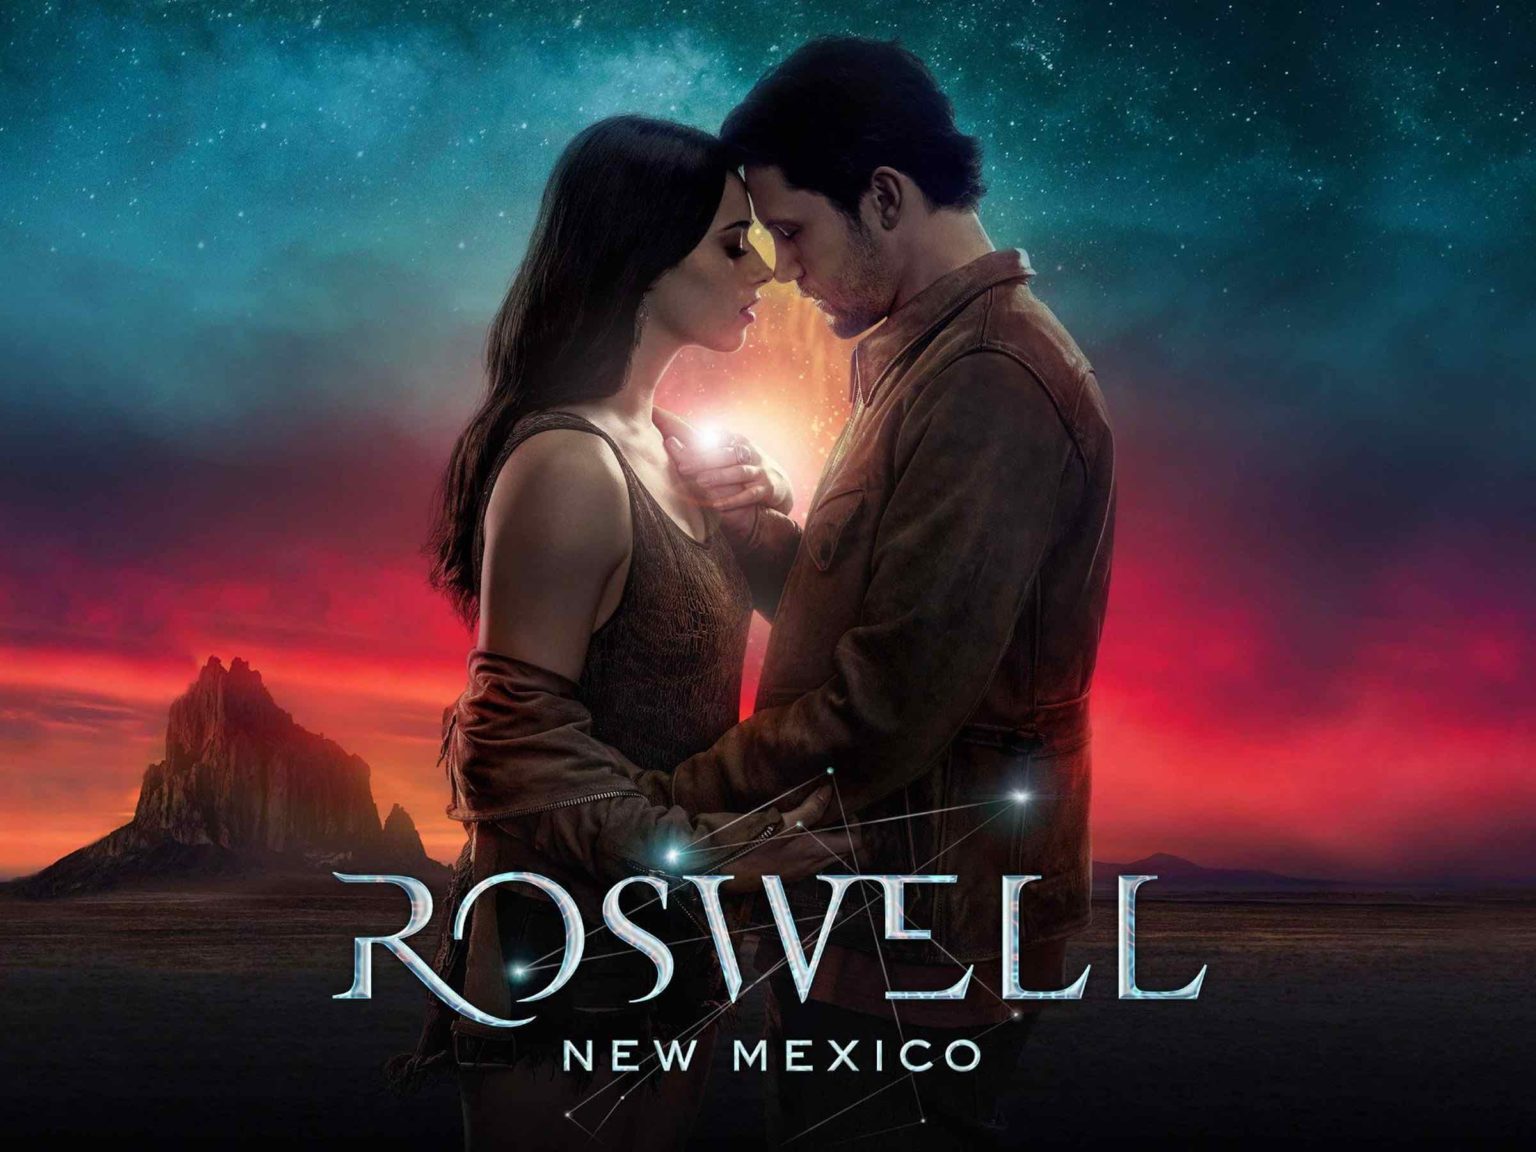 The CW’s 'Roswell, New Mexico' TV show is just around the bend of this weekend with season two. Here's everything we know.